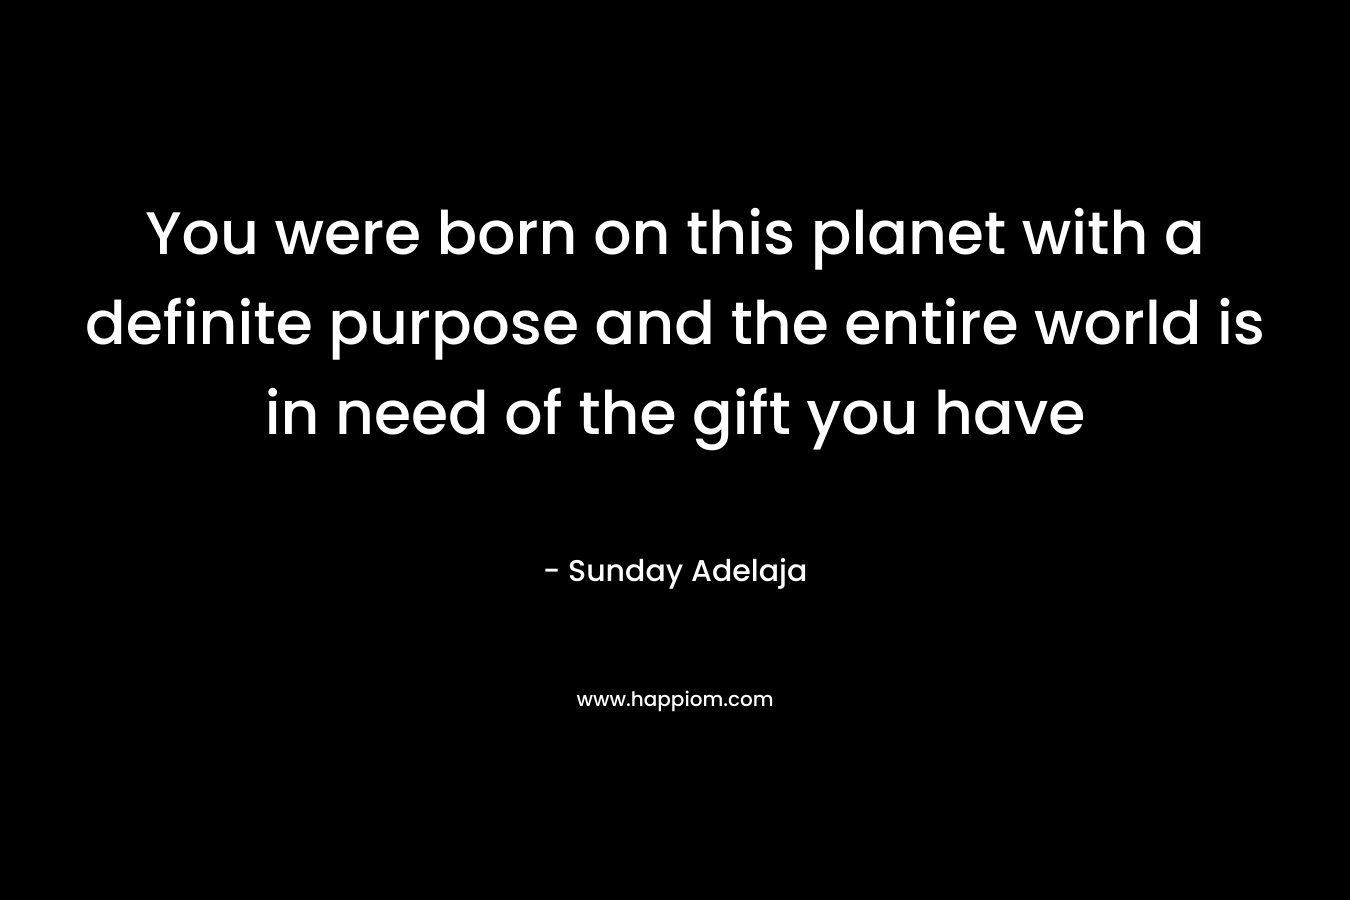 You were born on this planet with a definite purpose and the entire world is in need of the gift you have